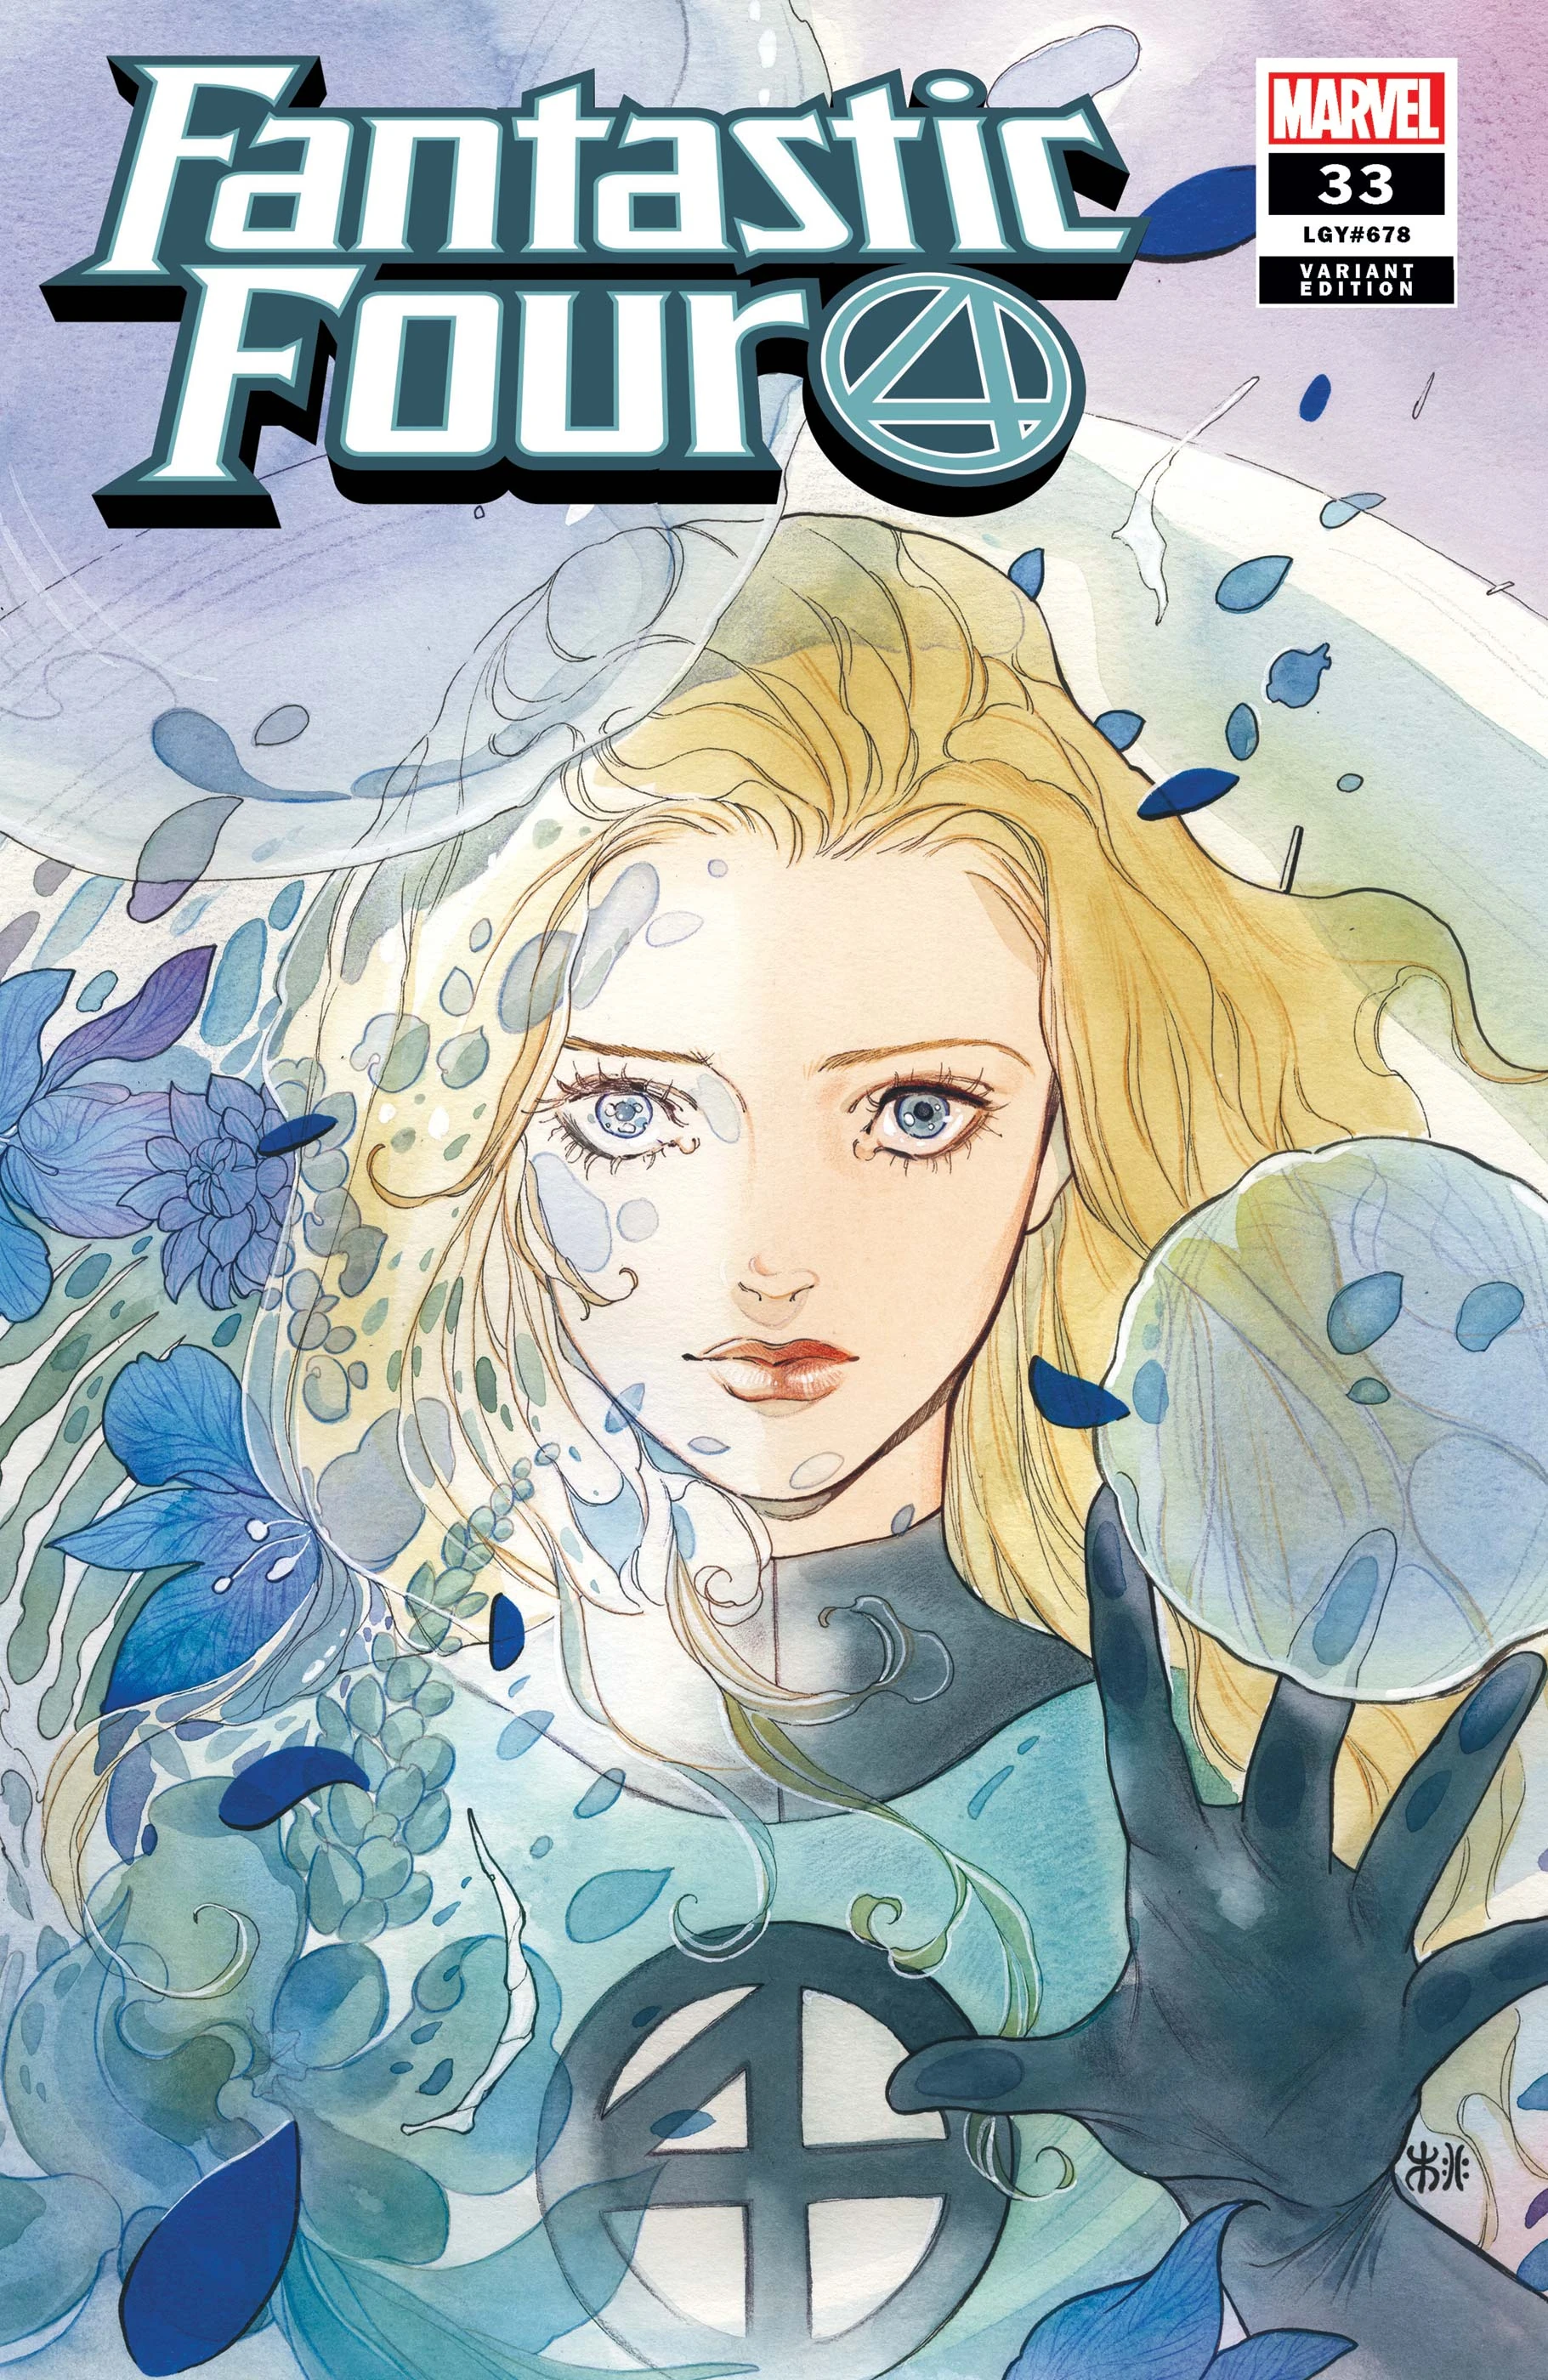 Sue Storm looks her best on Peach Momoko's variant cover to Fantastic Four Vol. 6 #33"Bride of Doom, Part 2: Royal Wedding" (2021), Marvel Comics